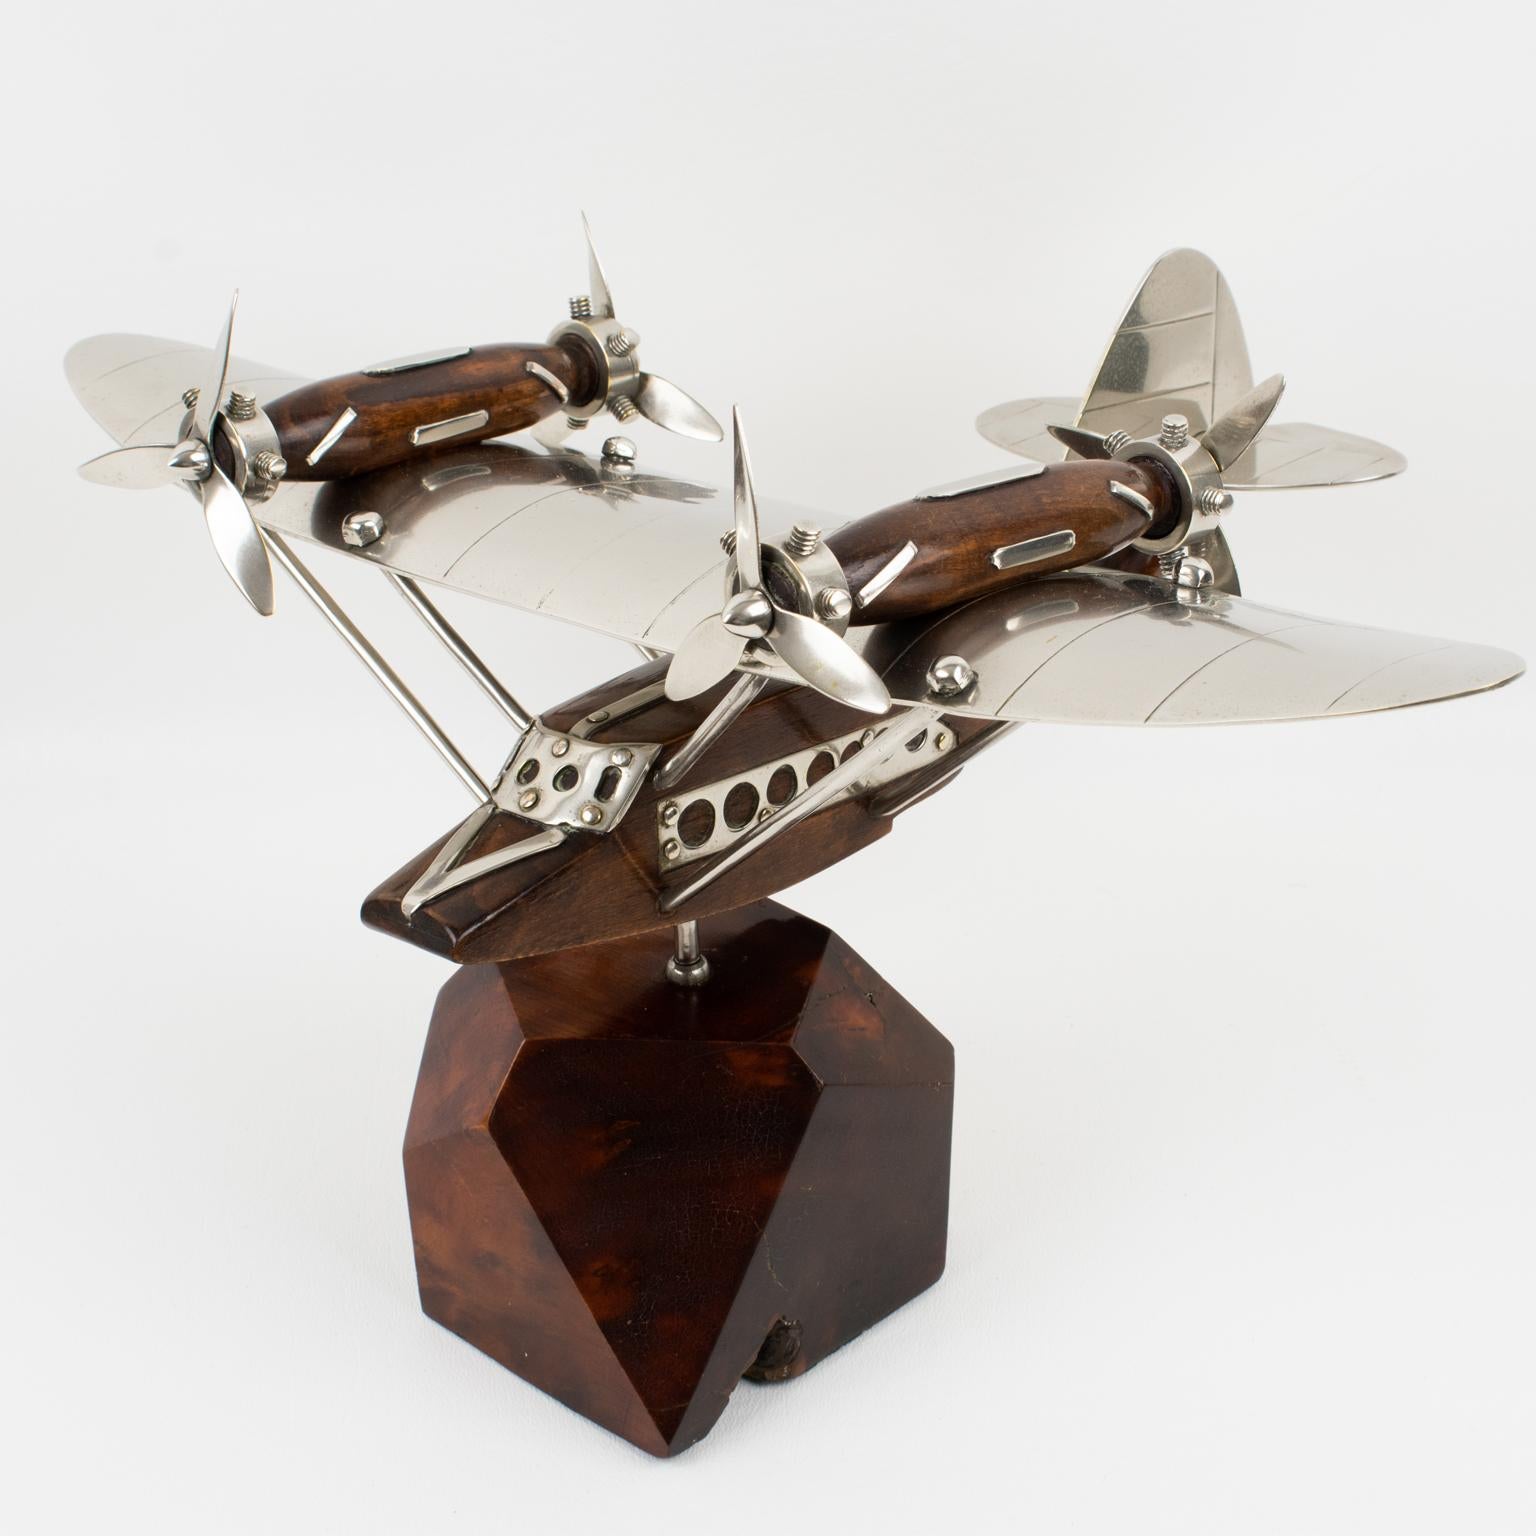 Mid-20th Century French Art Deco Wood and Chrome Airplane SeaPlane Aviation Model, 1940s For Sale